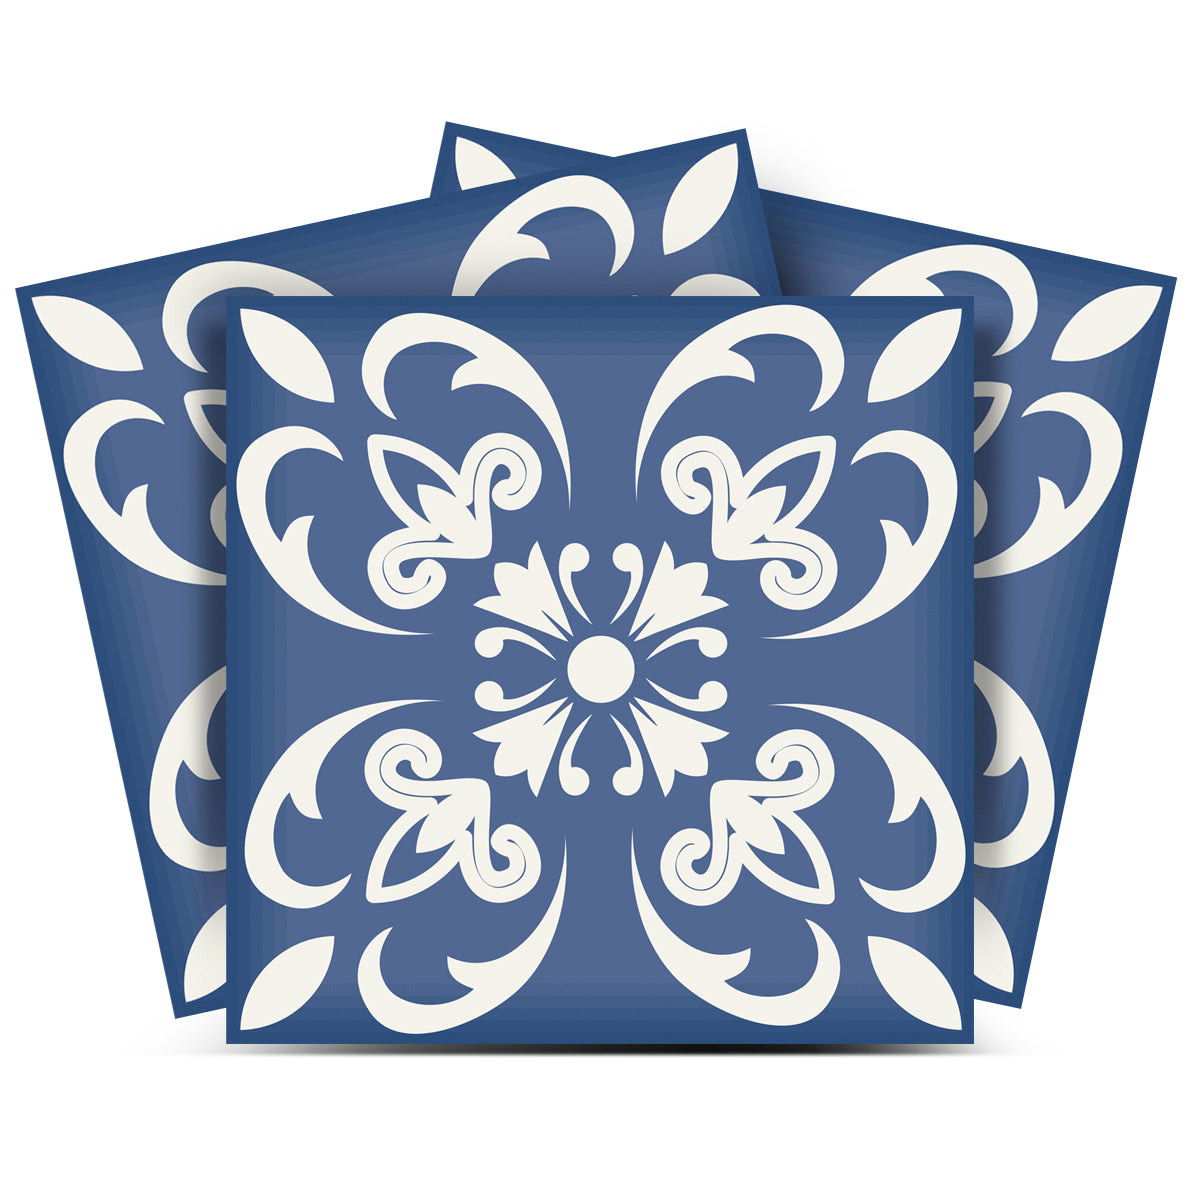 8" X 8" Wedgwood Blue And White  Peel And Stick Removable Tiles-390892-1